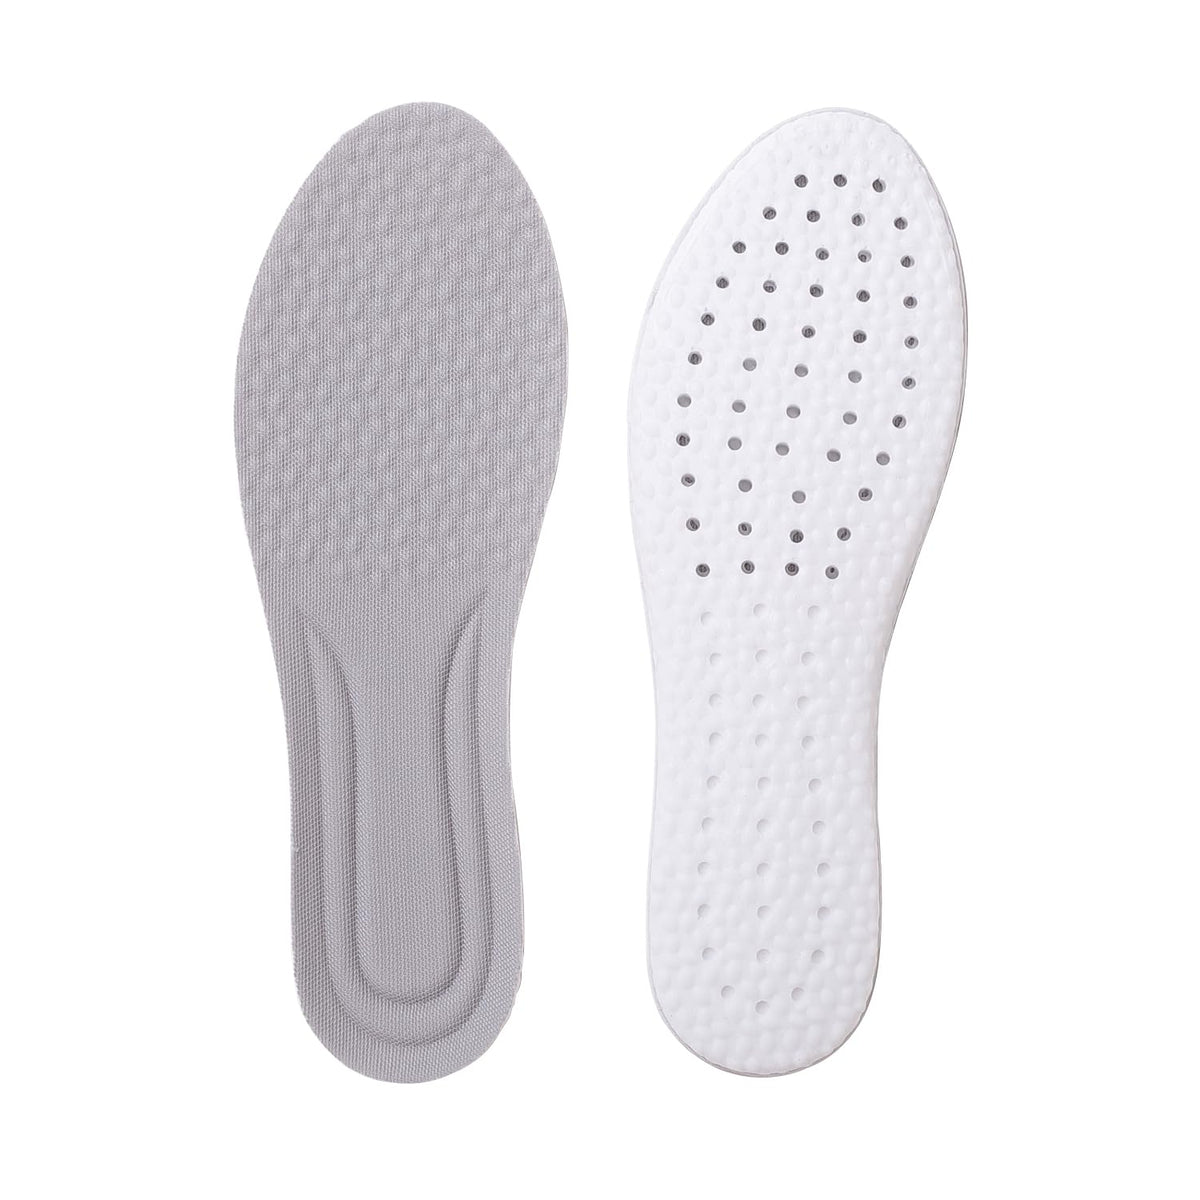 Dr Foot Air-Pillow® Insoles | Comfortable, Porous, and Breathable Insoles for Sports | Shock Absorption for Reduced Impact | Soothing Sensation | Relieves Foot Fatigue | - 1 Pair - (Small Size)